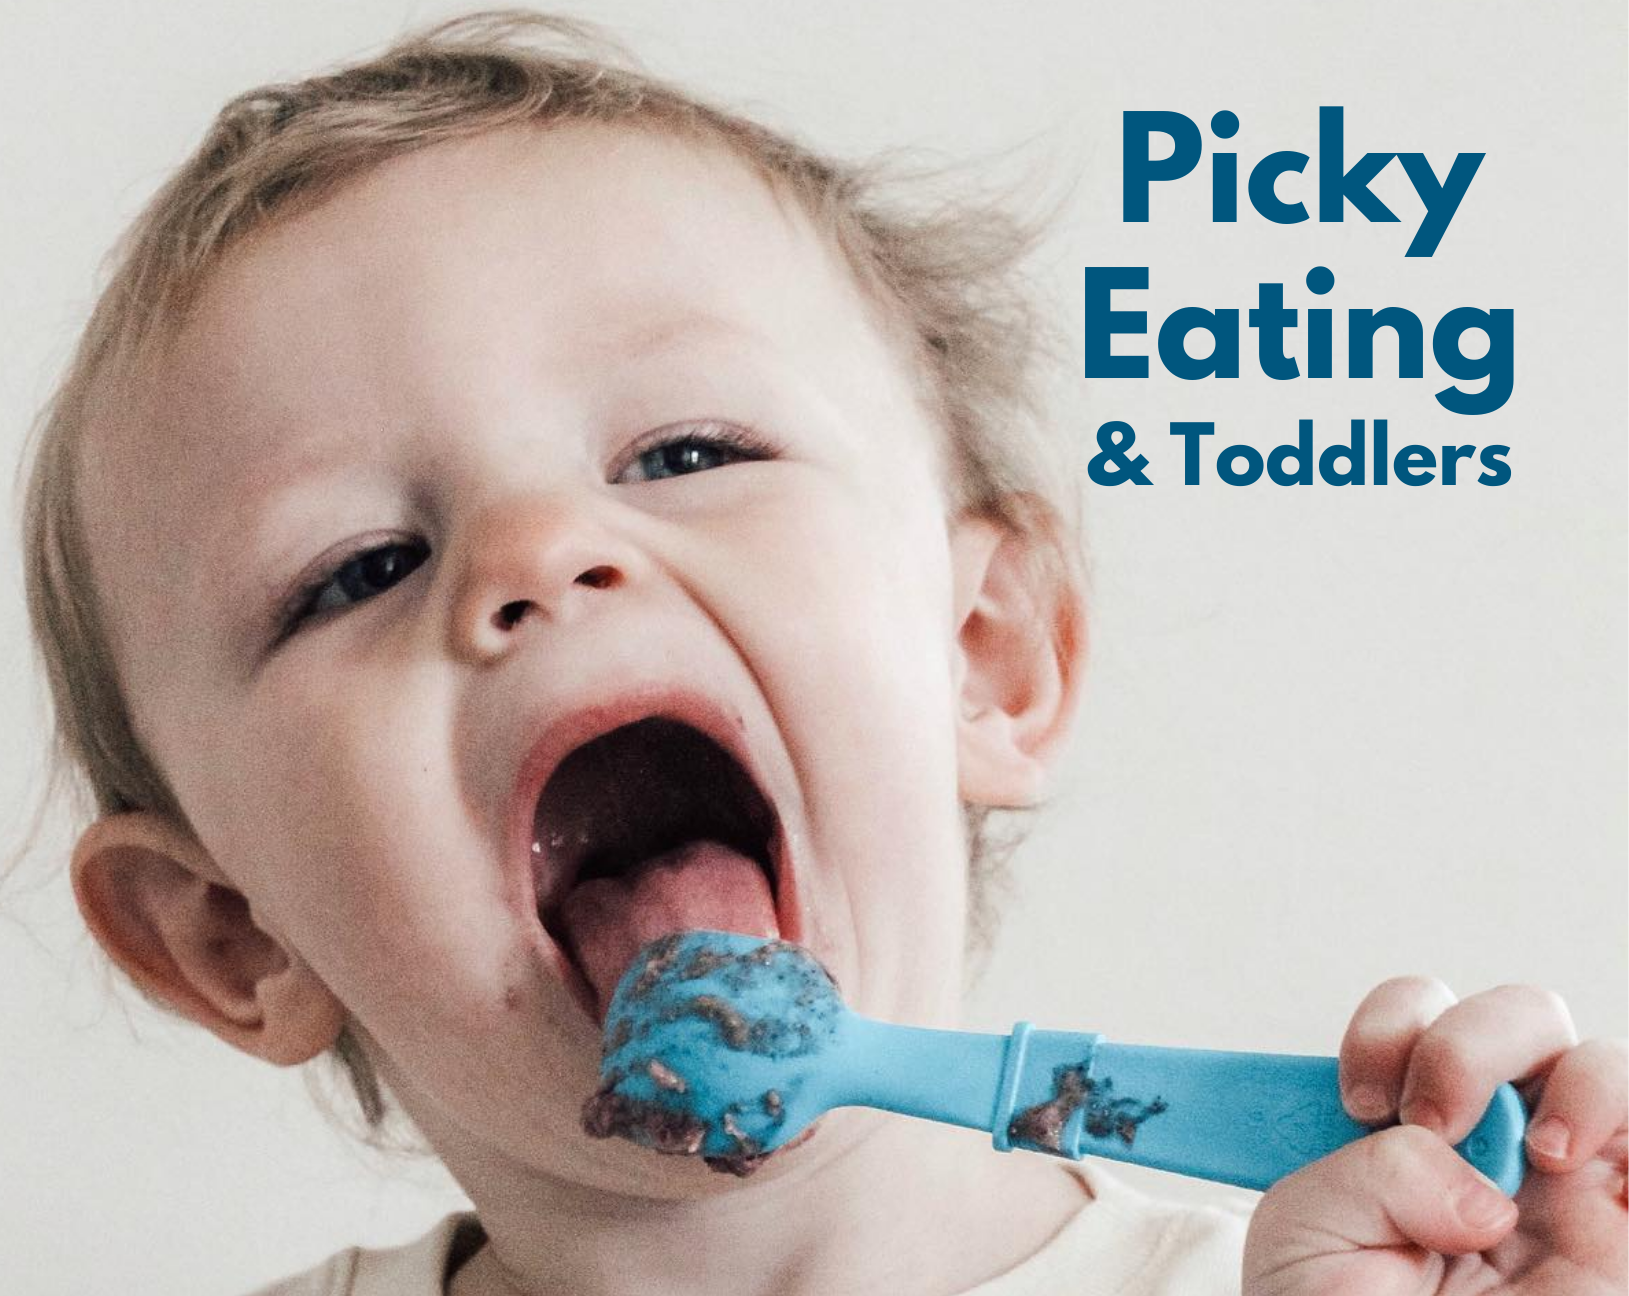 Picky Eating & Toddlers